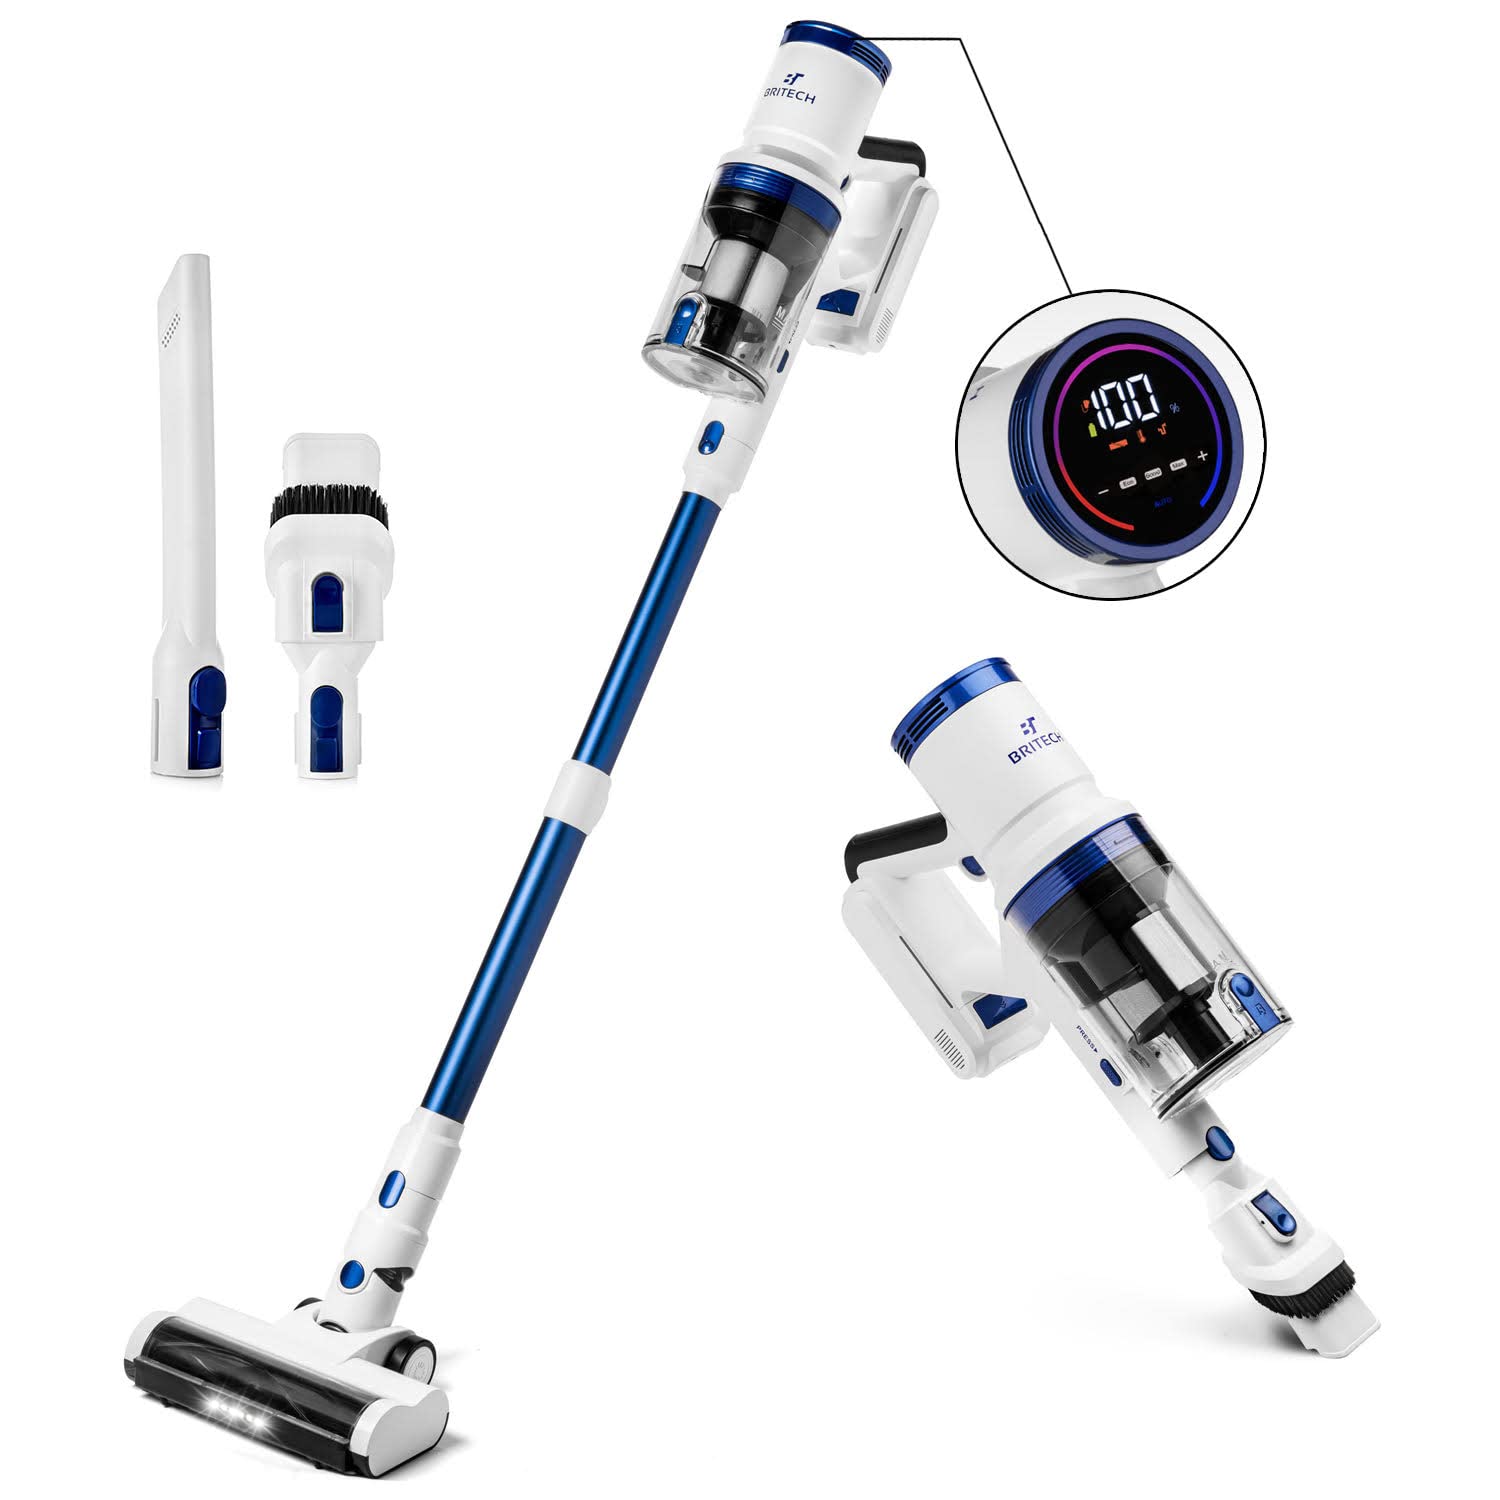 BRITECH Cordless Lightweight Stick Vacuum Cleaner, 300W Motor for Powerful Suction 40min Runtime, LED Display Screen & Headlights, Great for Carpet Cleaner, Hardwood Floor & Pet Hair (Blue)  - Like New